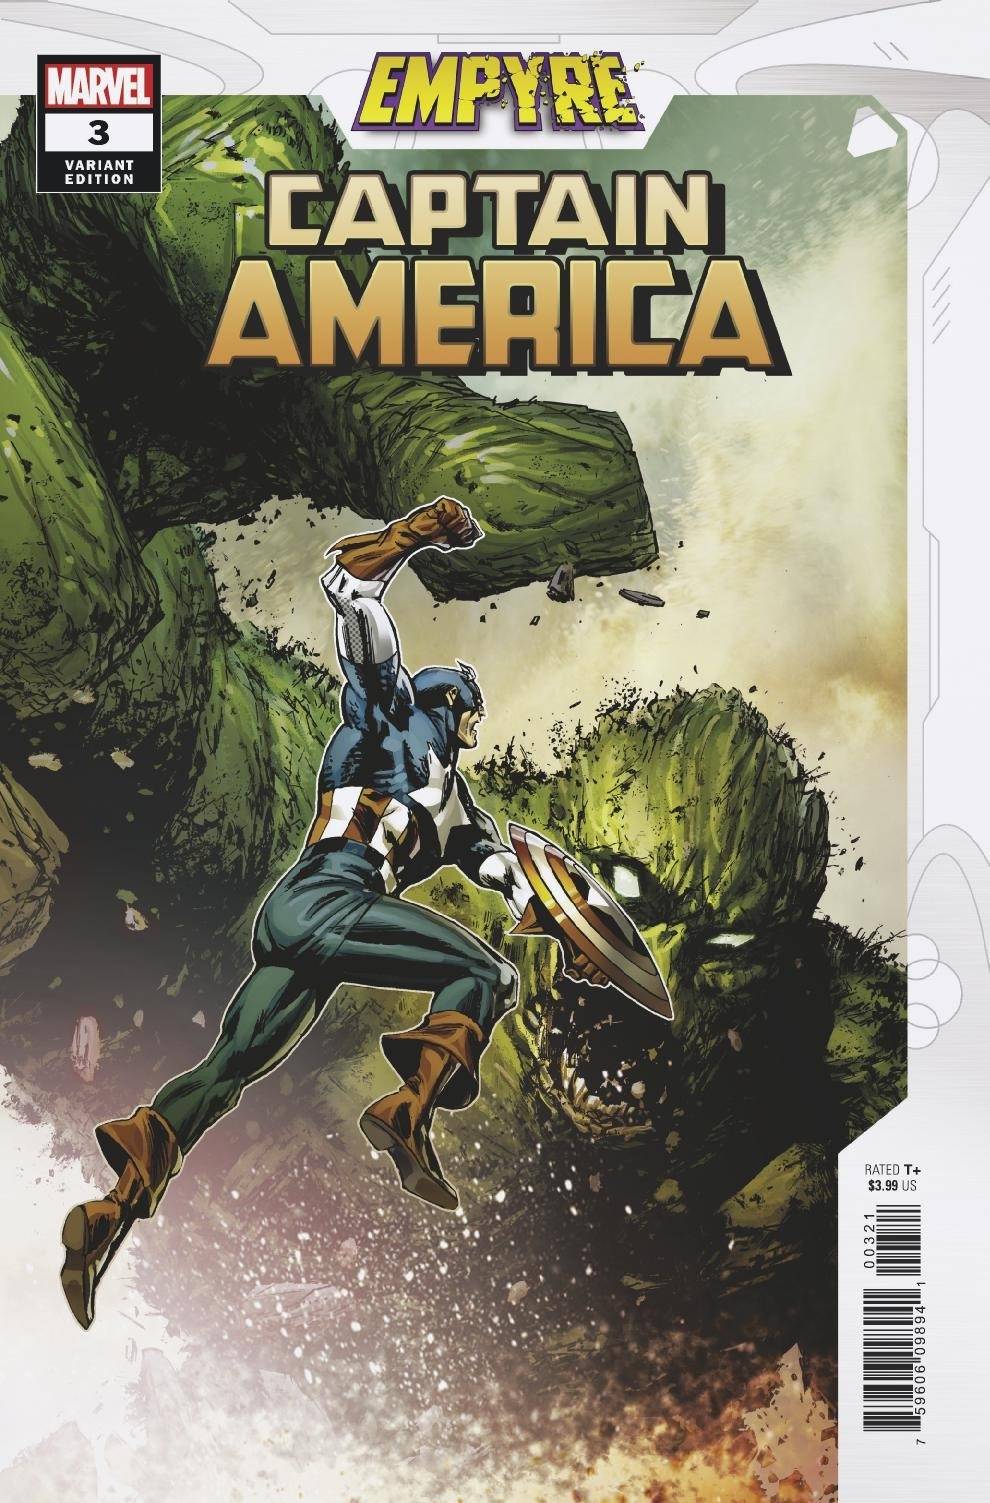 Empyre Captain America #3 B (Of 3) Butch Guice Variant (08/26/2020) Marvel